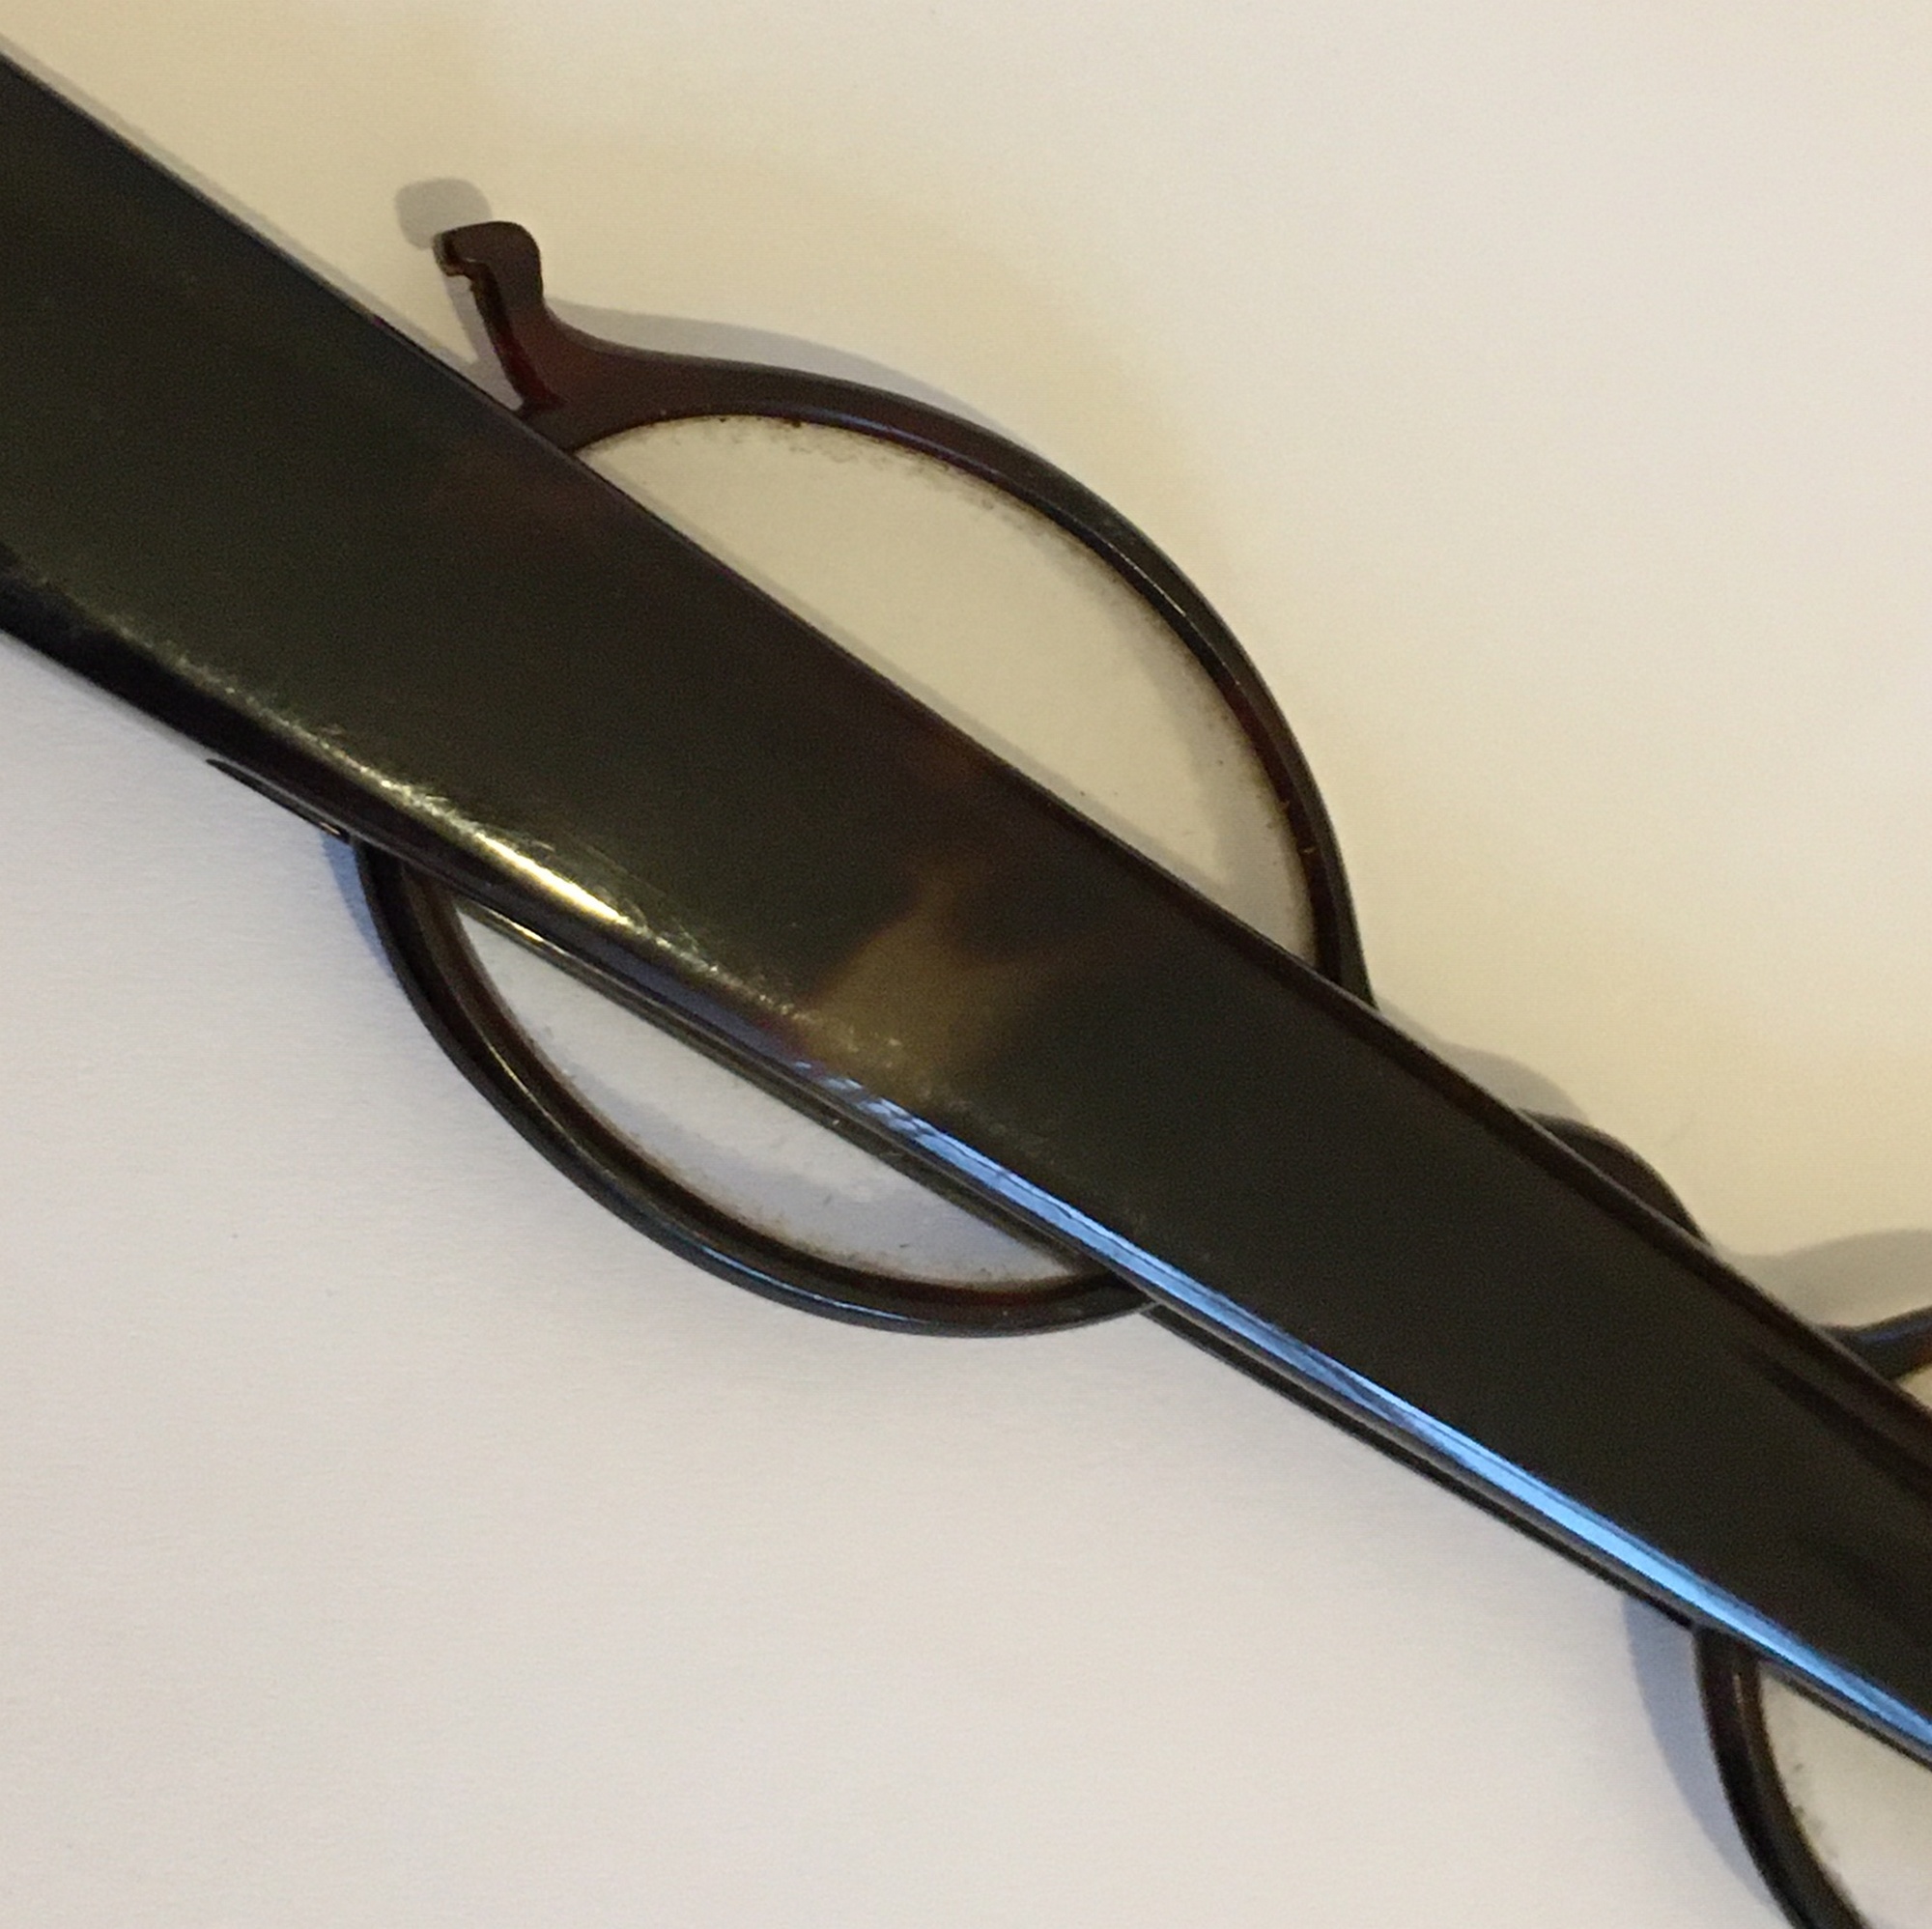 Antique Tortoiseshell Lorgnette - 30.0cm long and 12.0cm at the widest. - Image 7 of 7